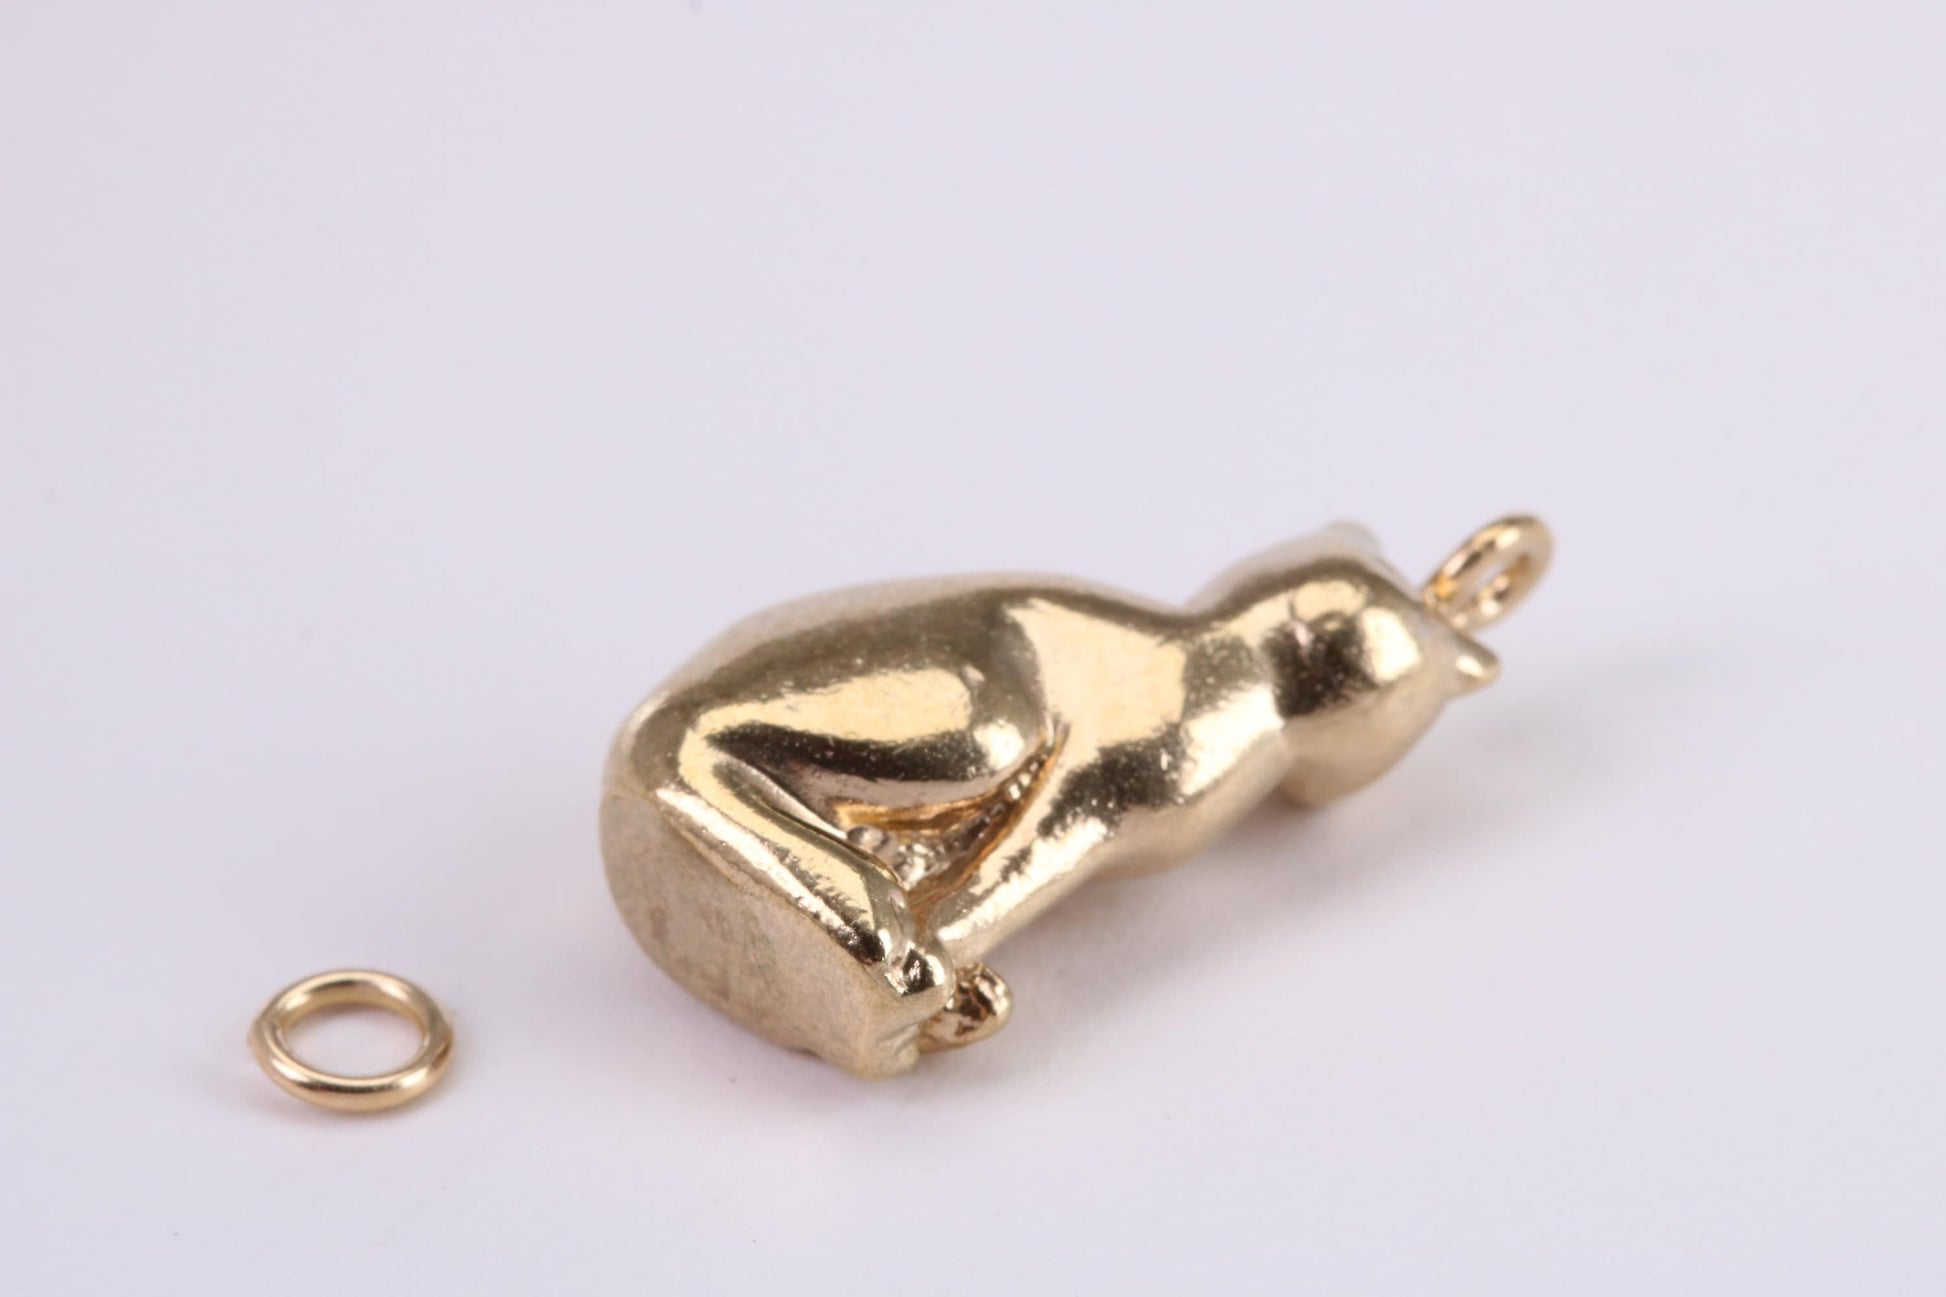 Large Sitting Cat Charm, Traditional Charm, Made from Solid Yellow Gold, British Hallmarked, Complete with Attachment Link